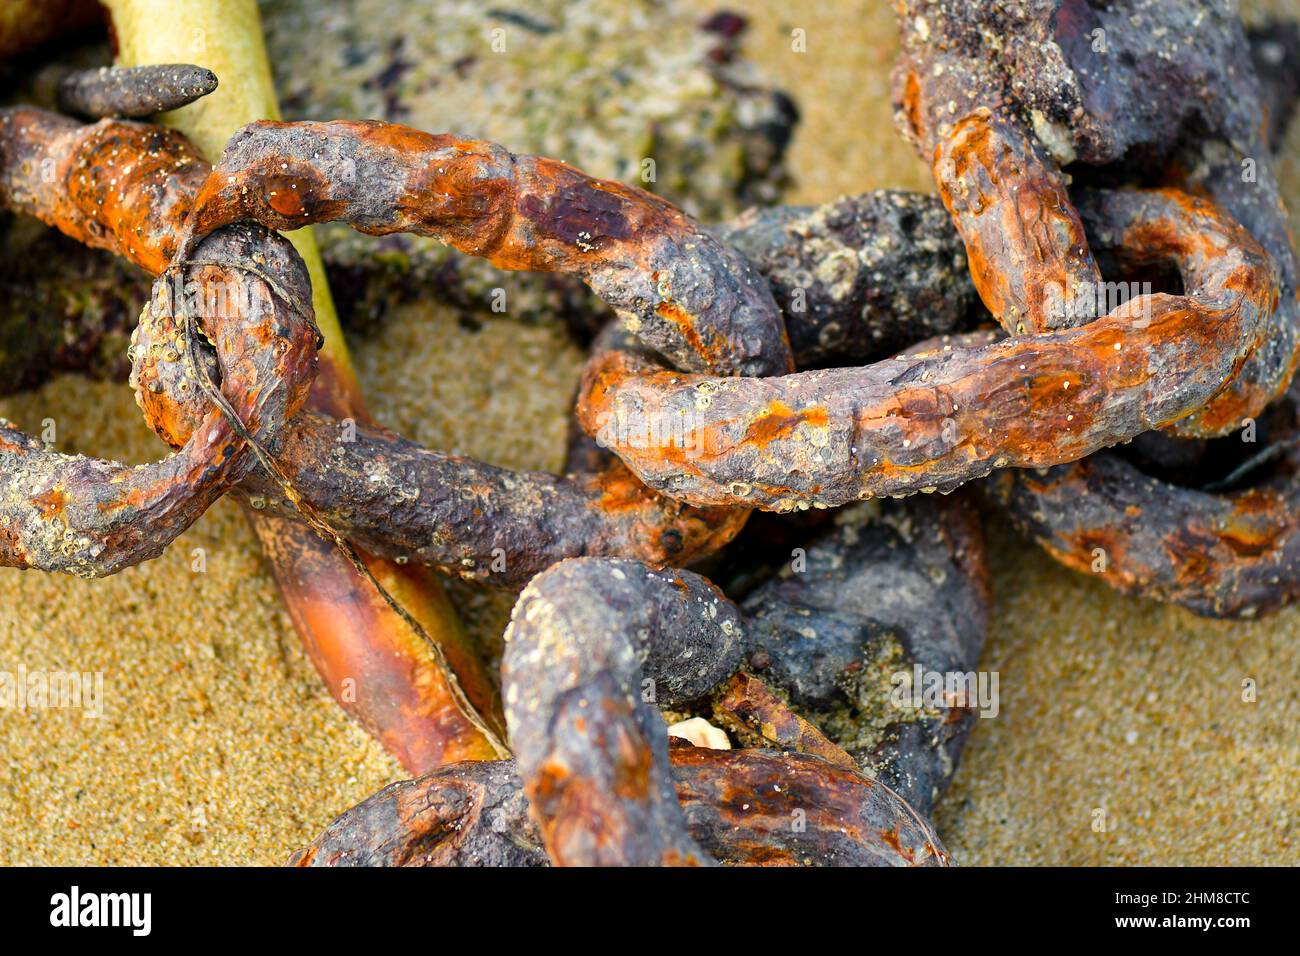 Rusty Chain on the beach still connected Stock Photo